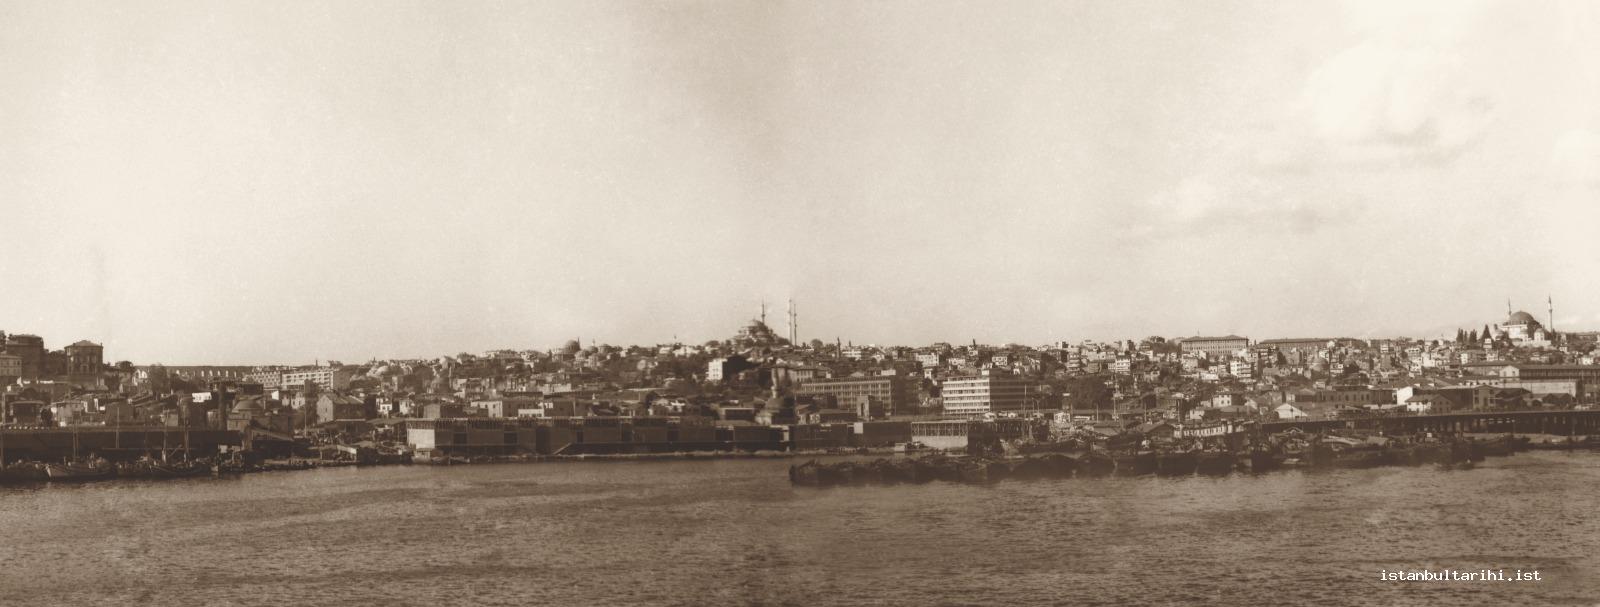 5- The general view of Fatih district from the Golden Horn